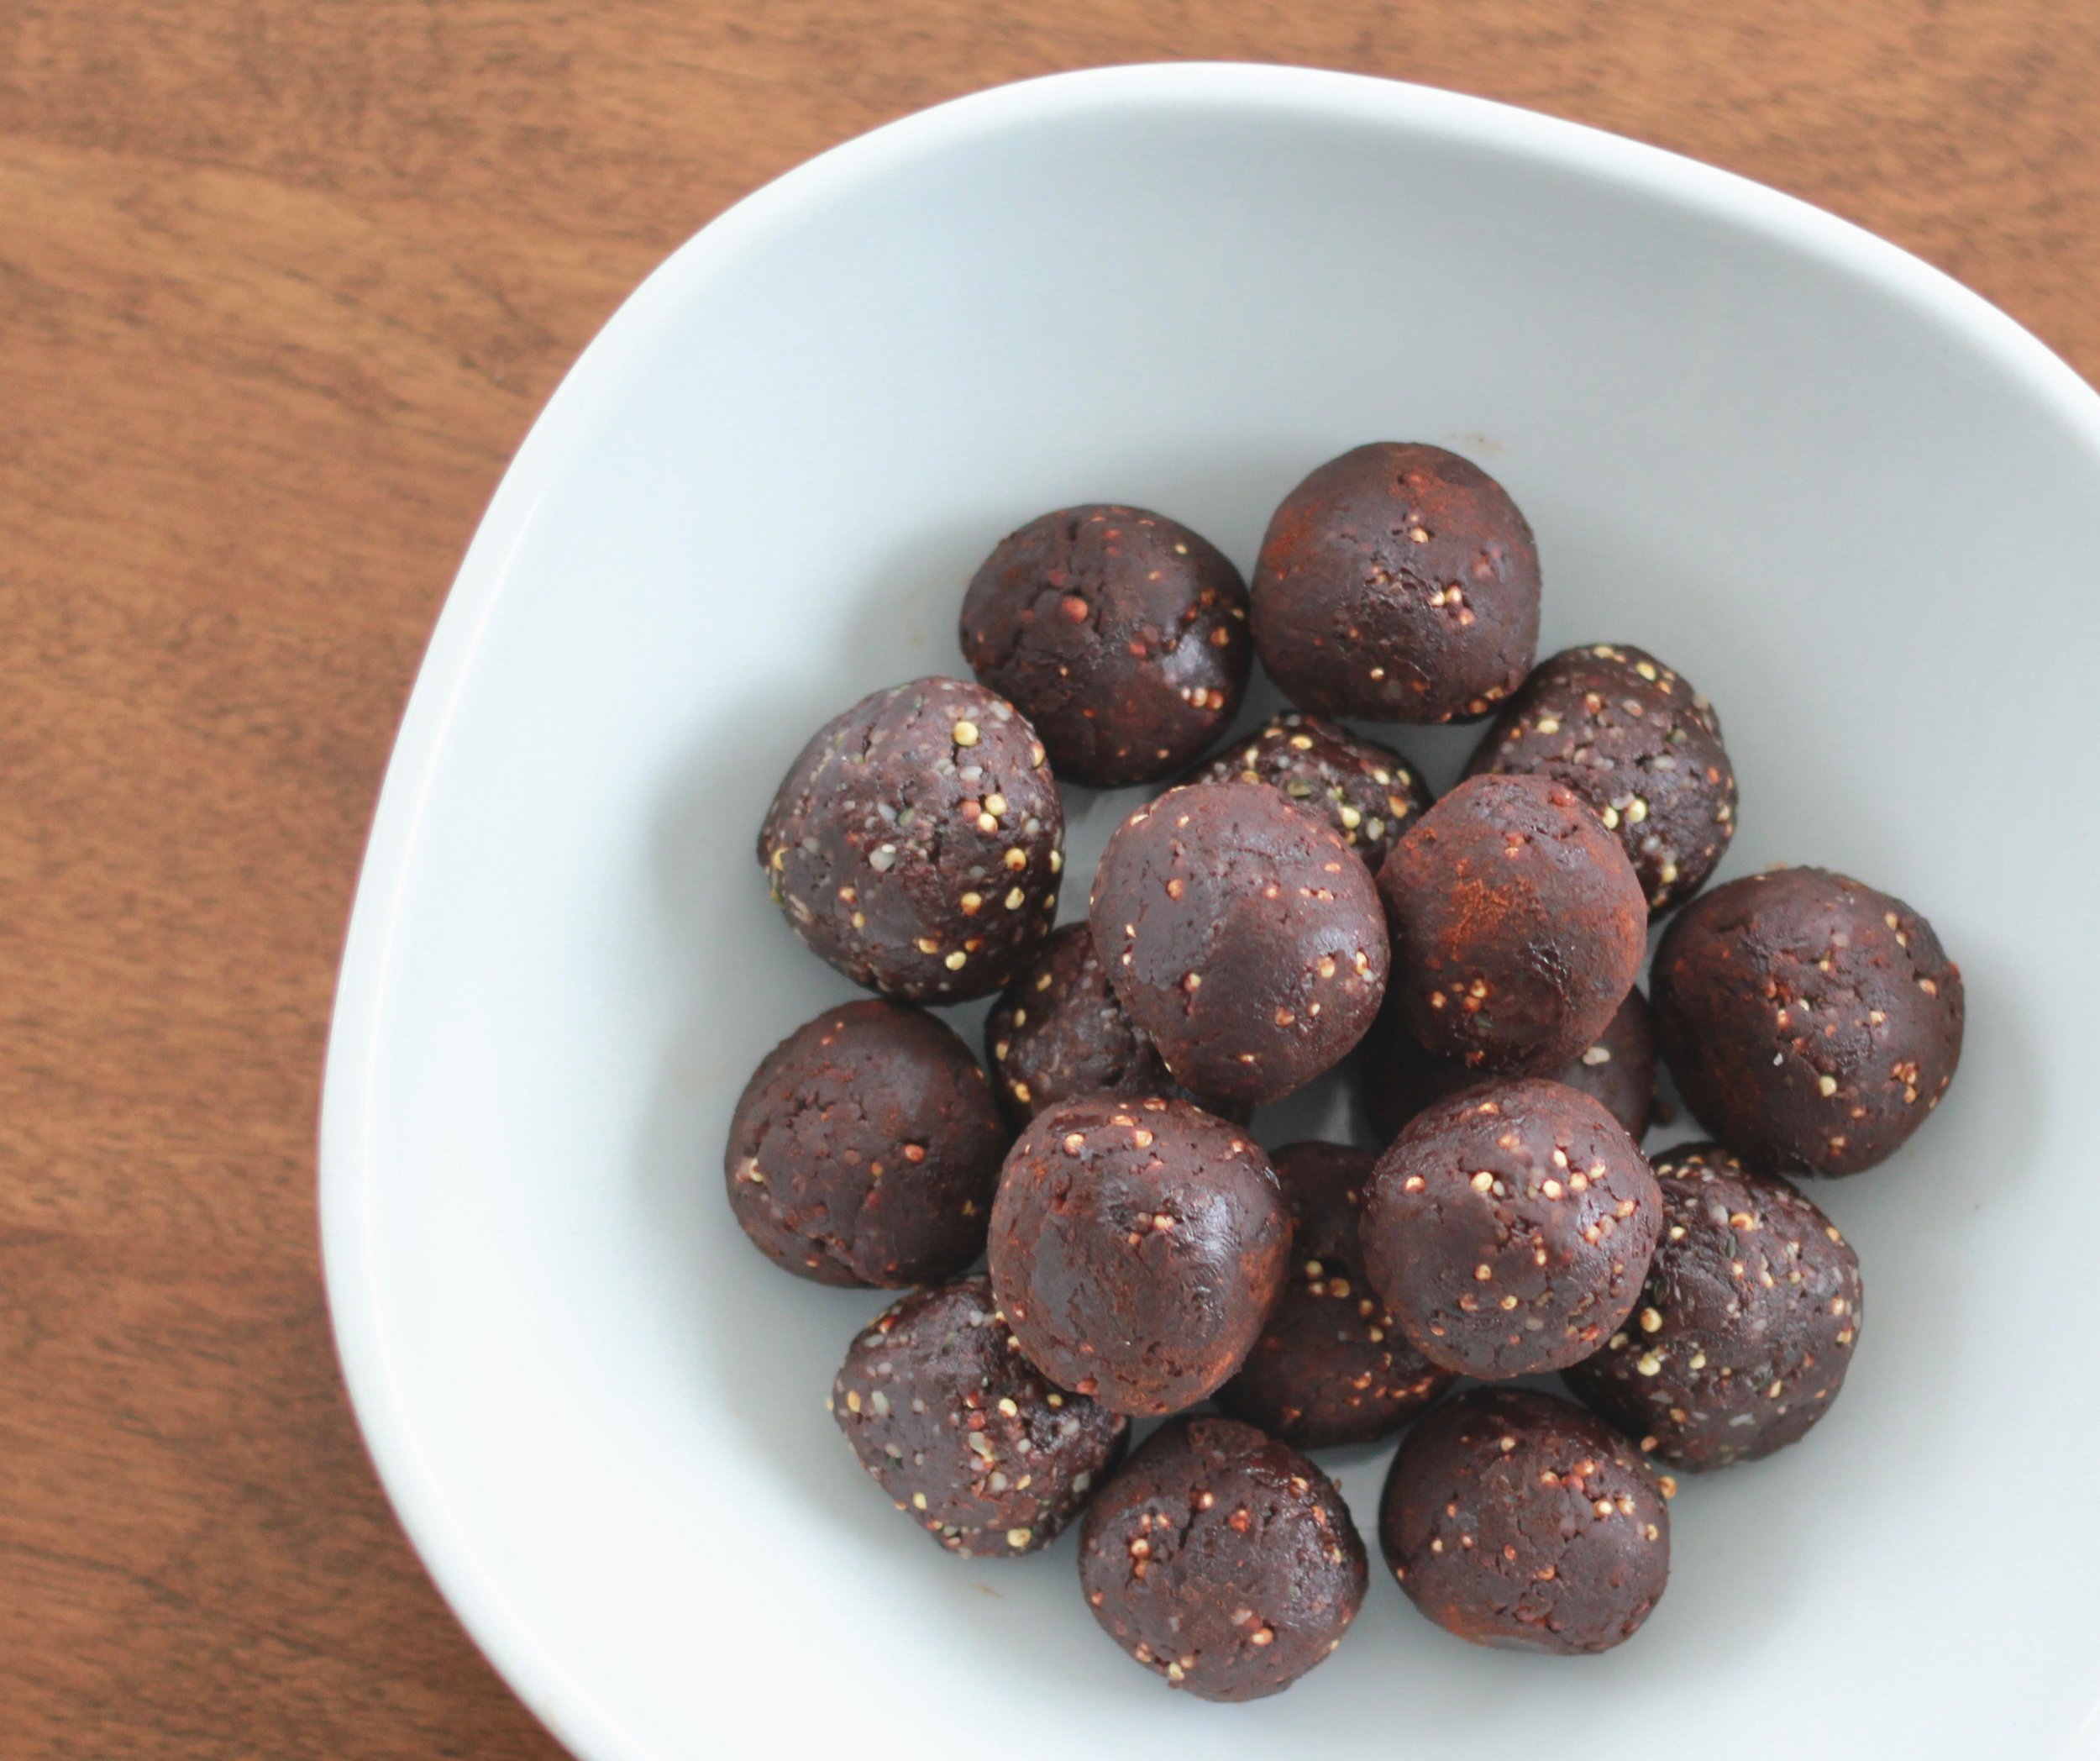 The millet in these truffles creates the perfect crunch!